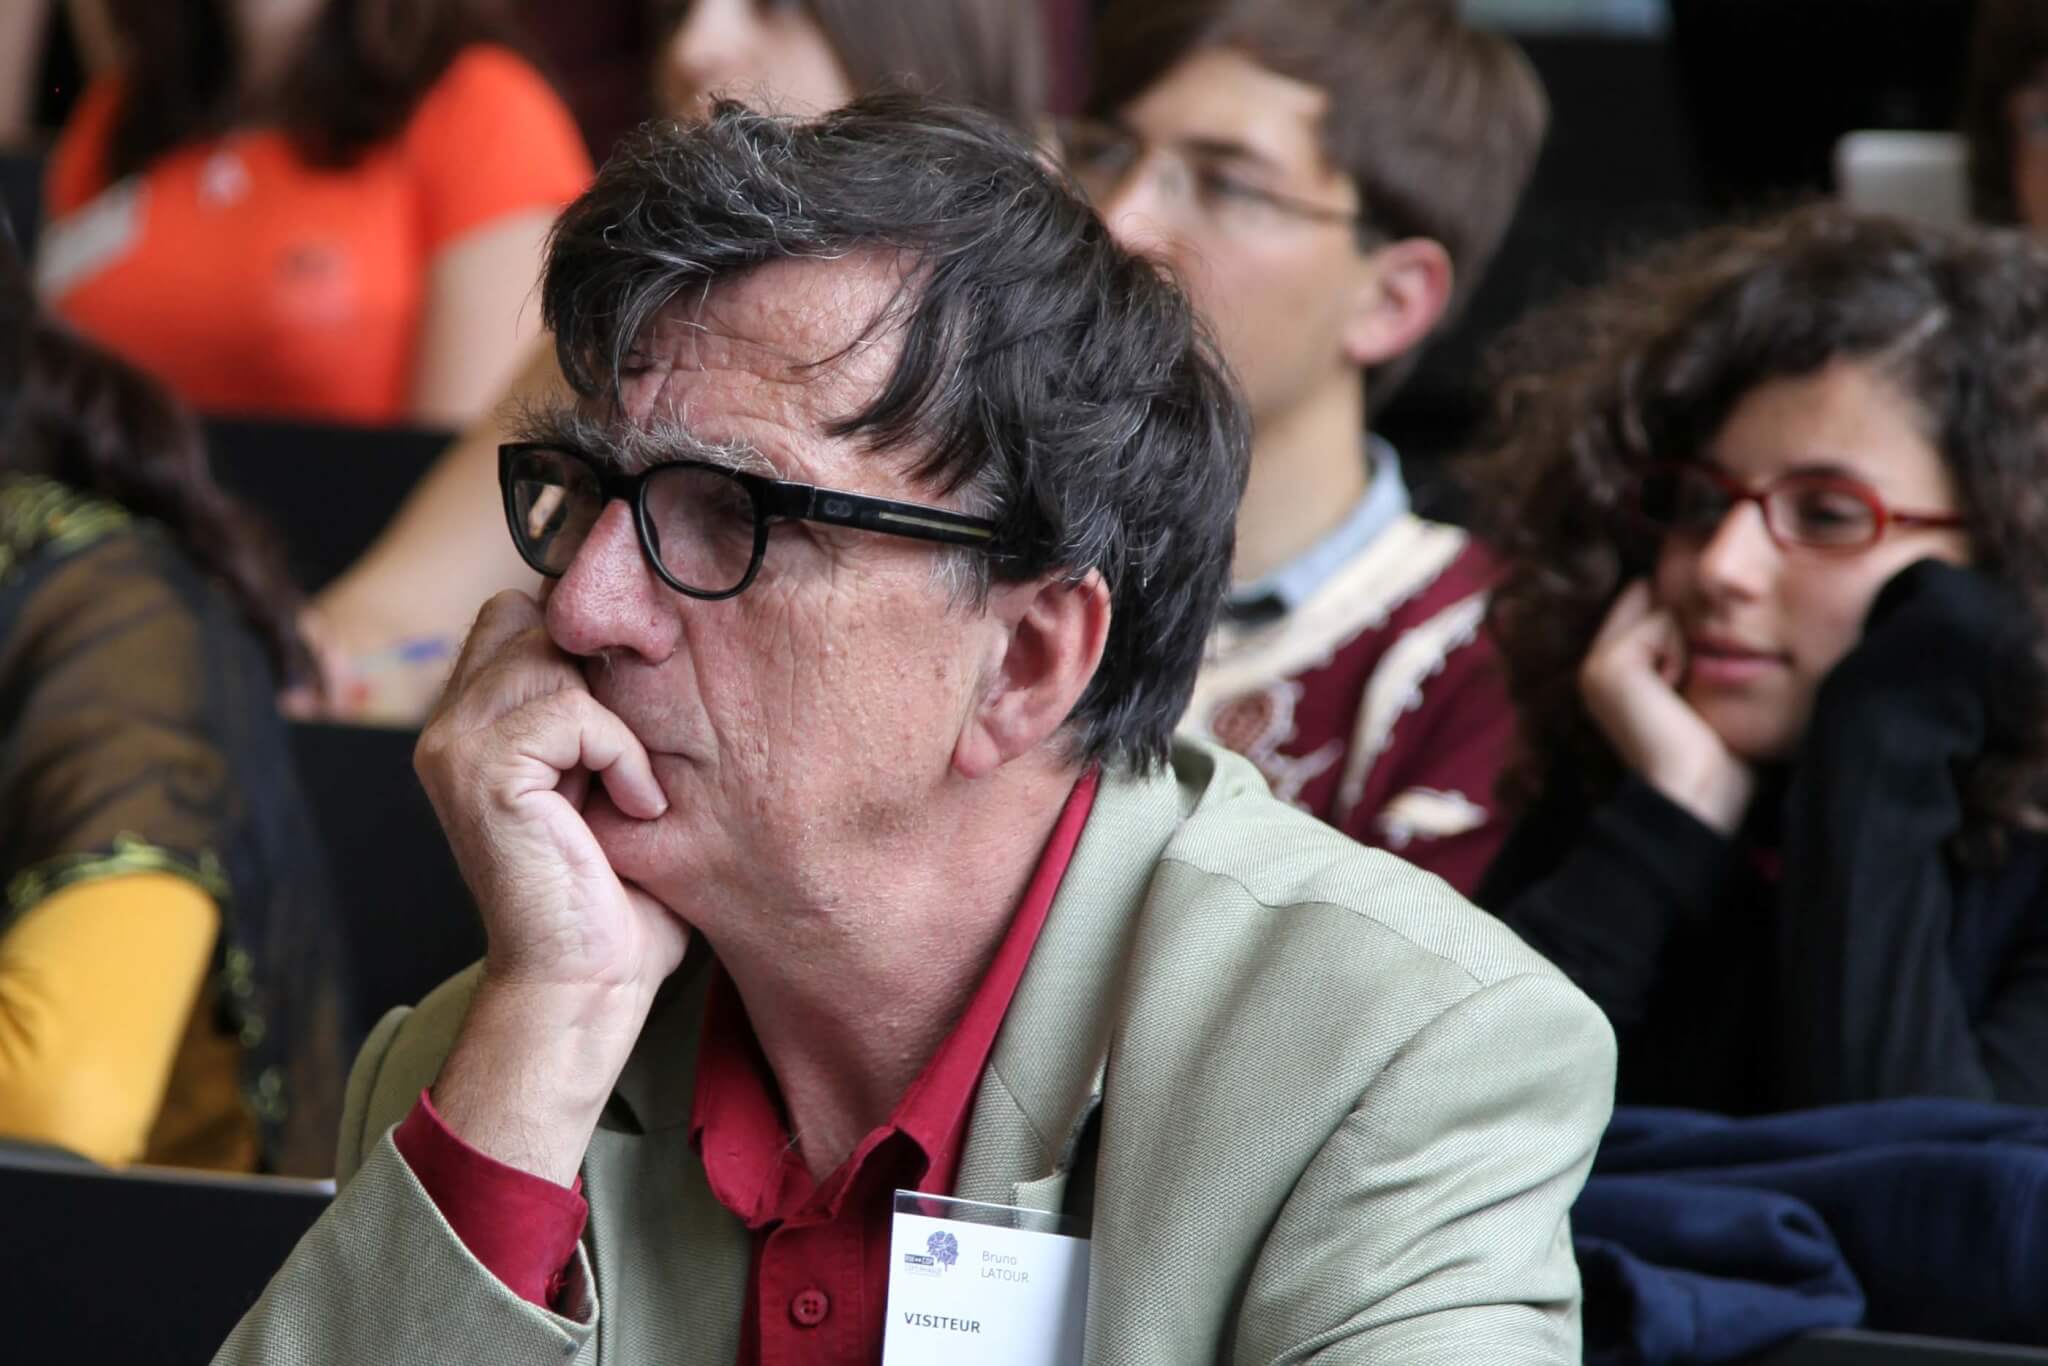 bruno latour sits pensively in an audience